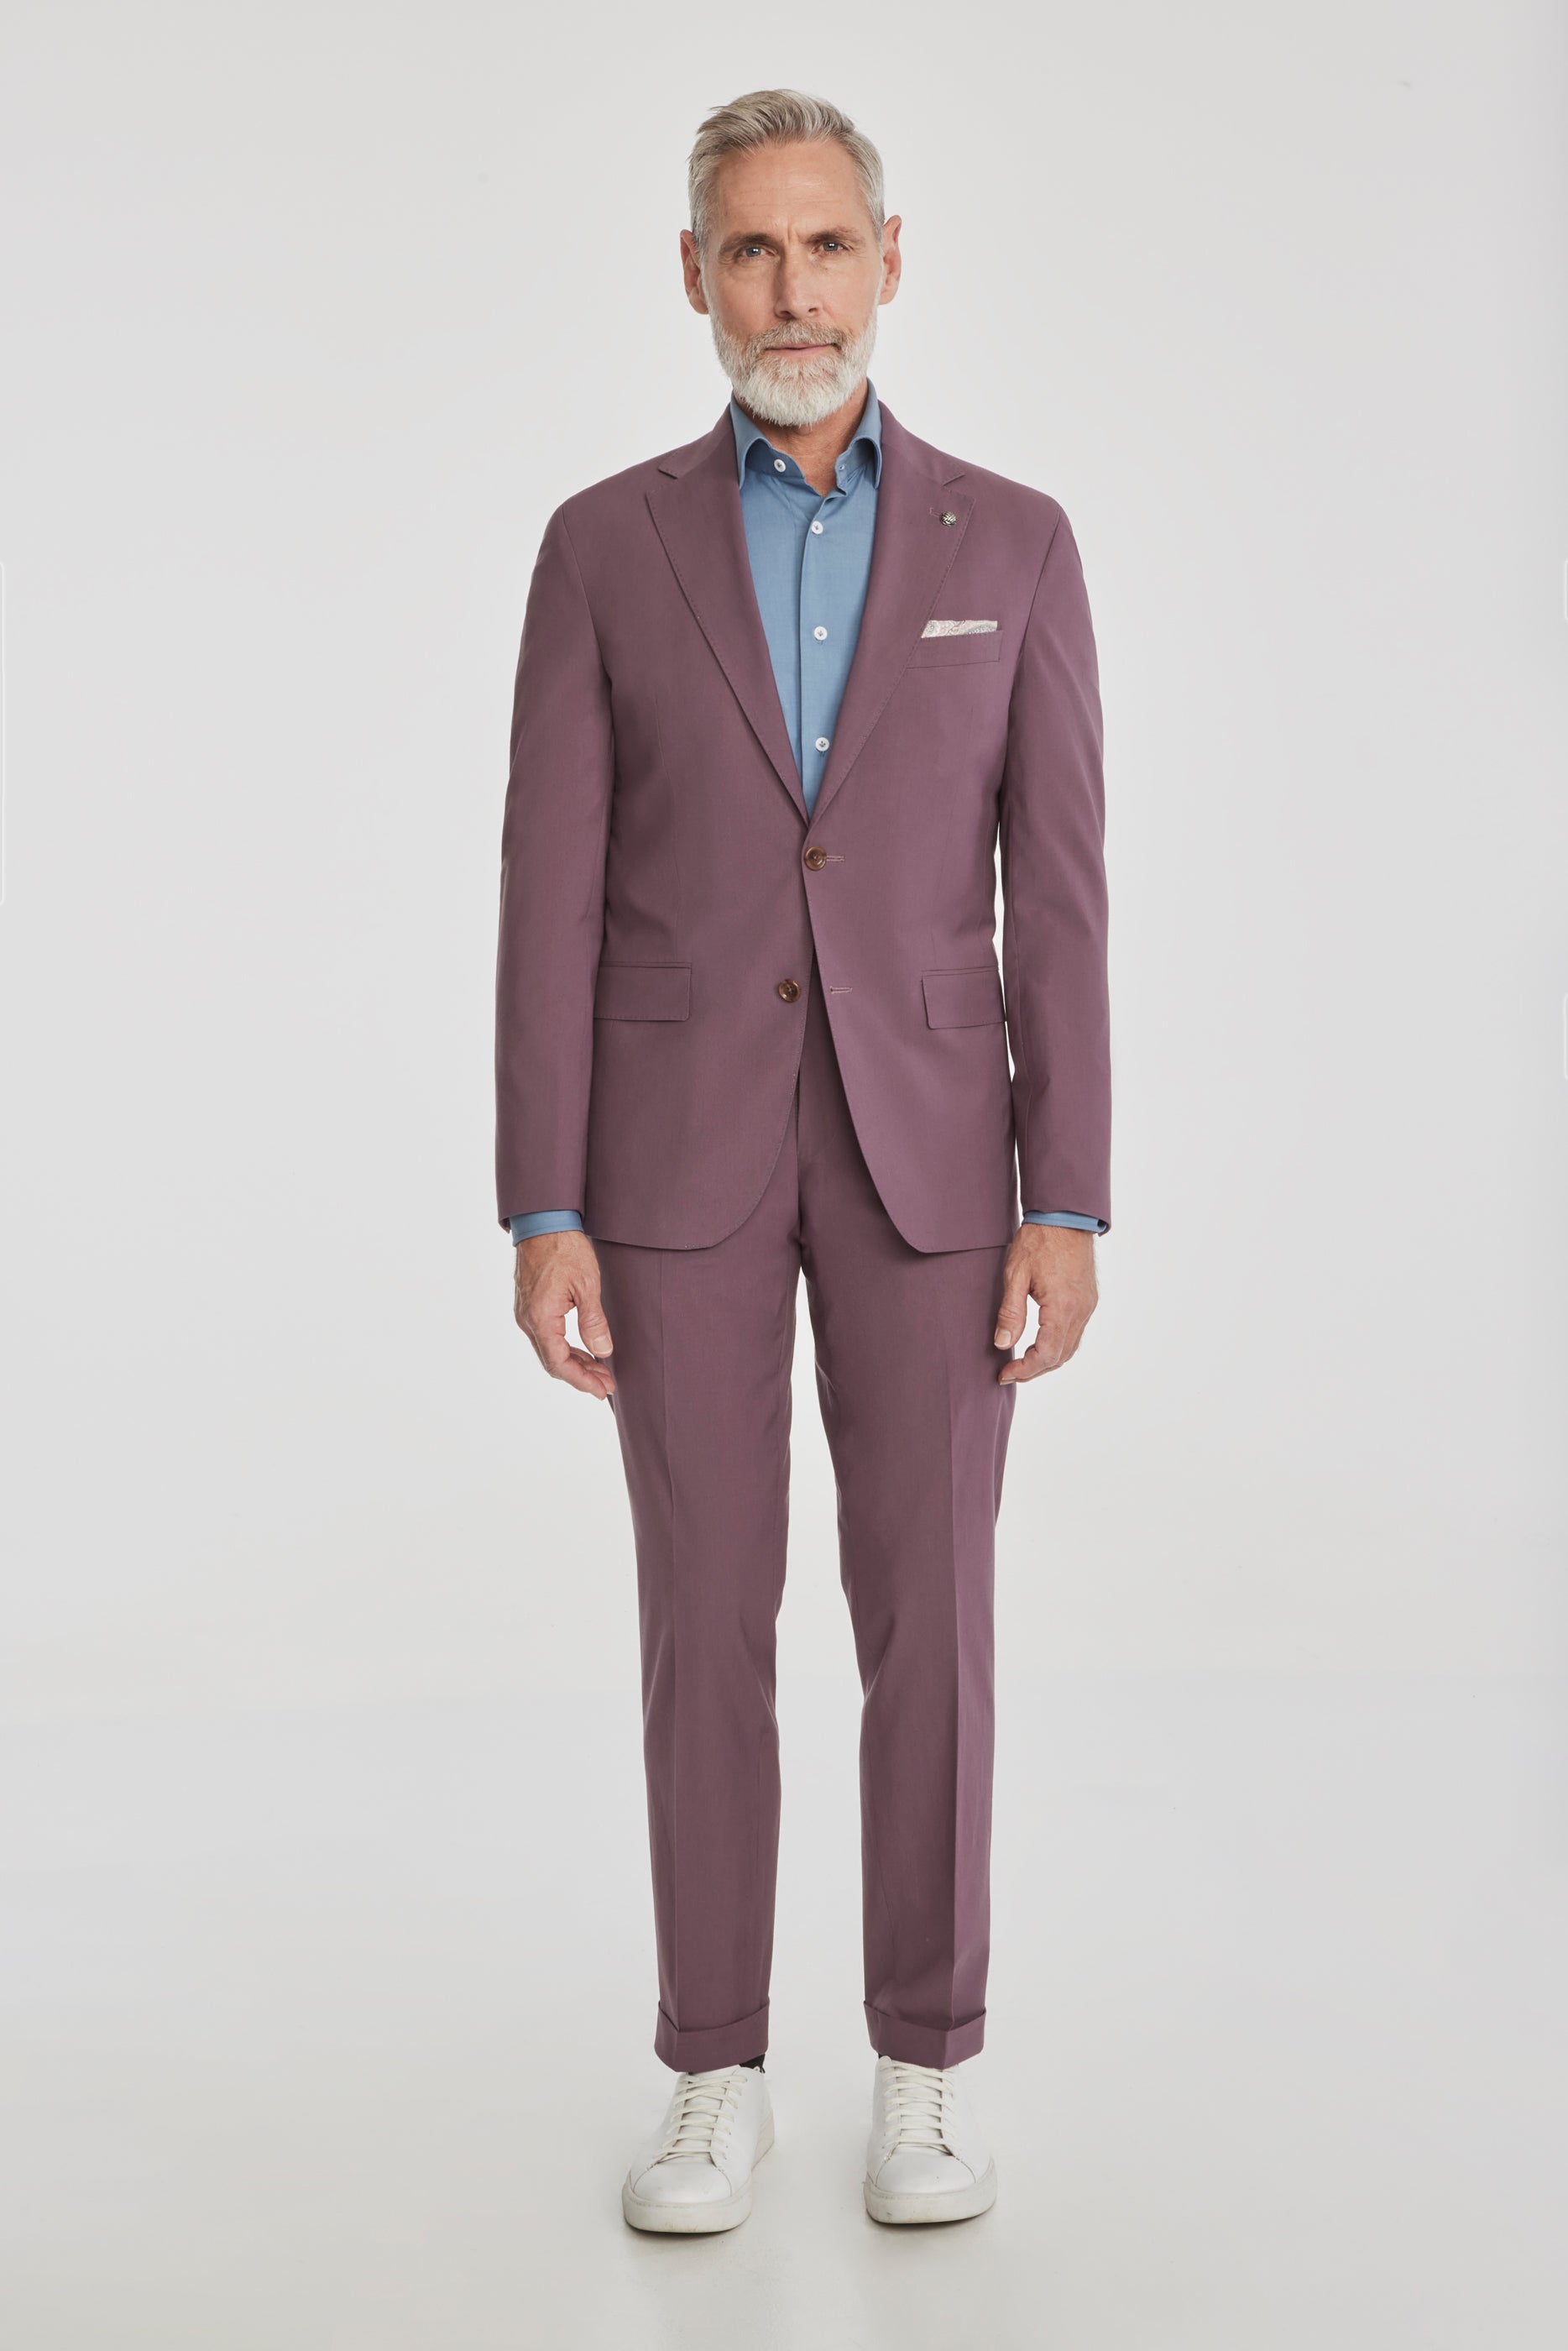 Alt view 2 Midland Solid Wool Cotton Stretch Suit in Berry